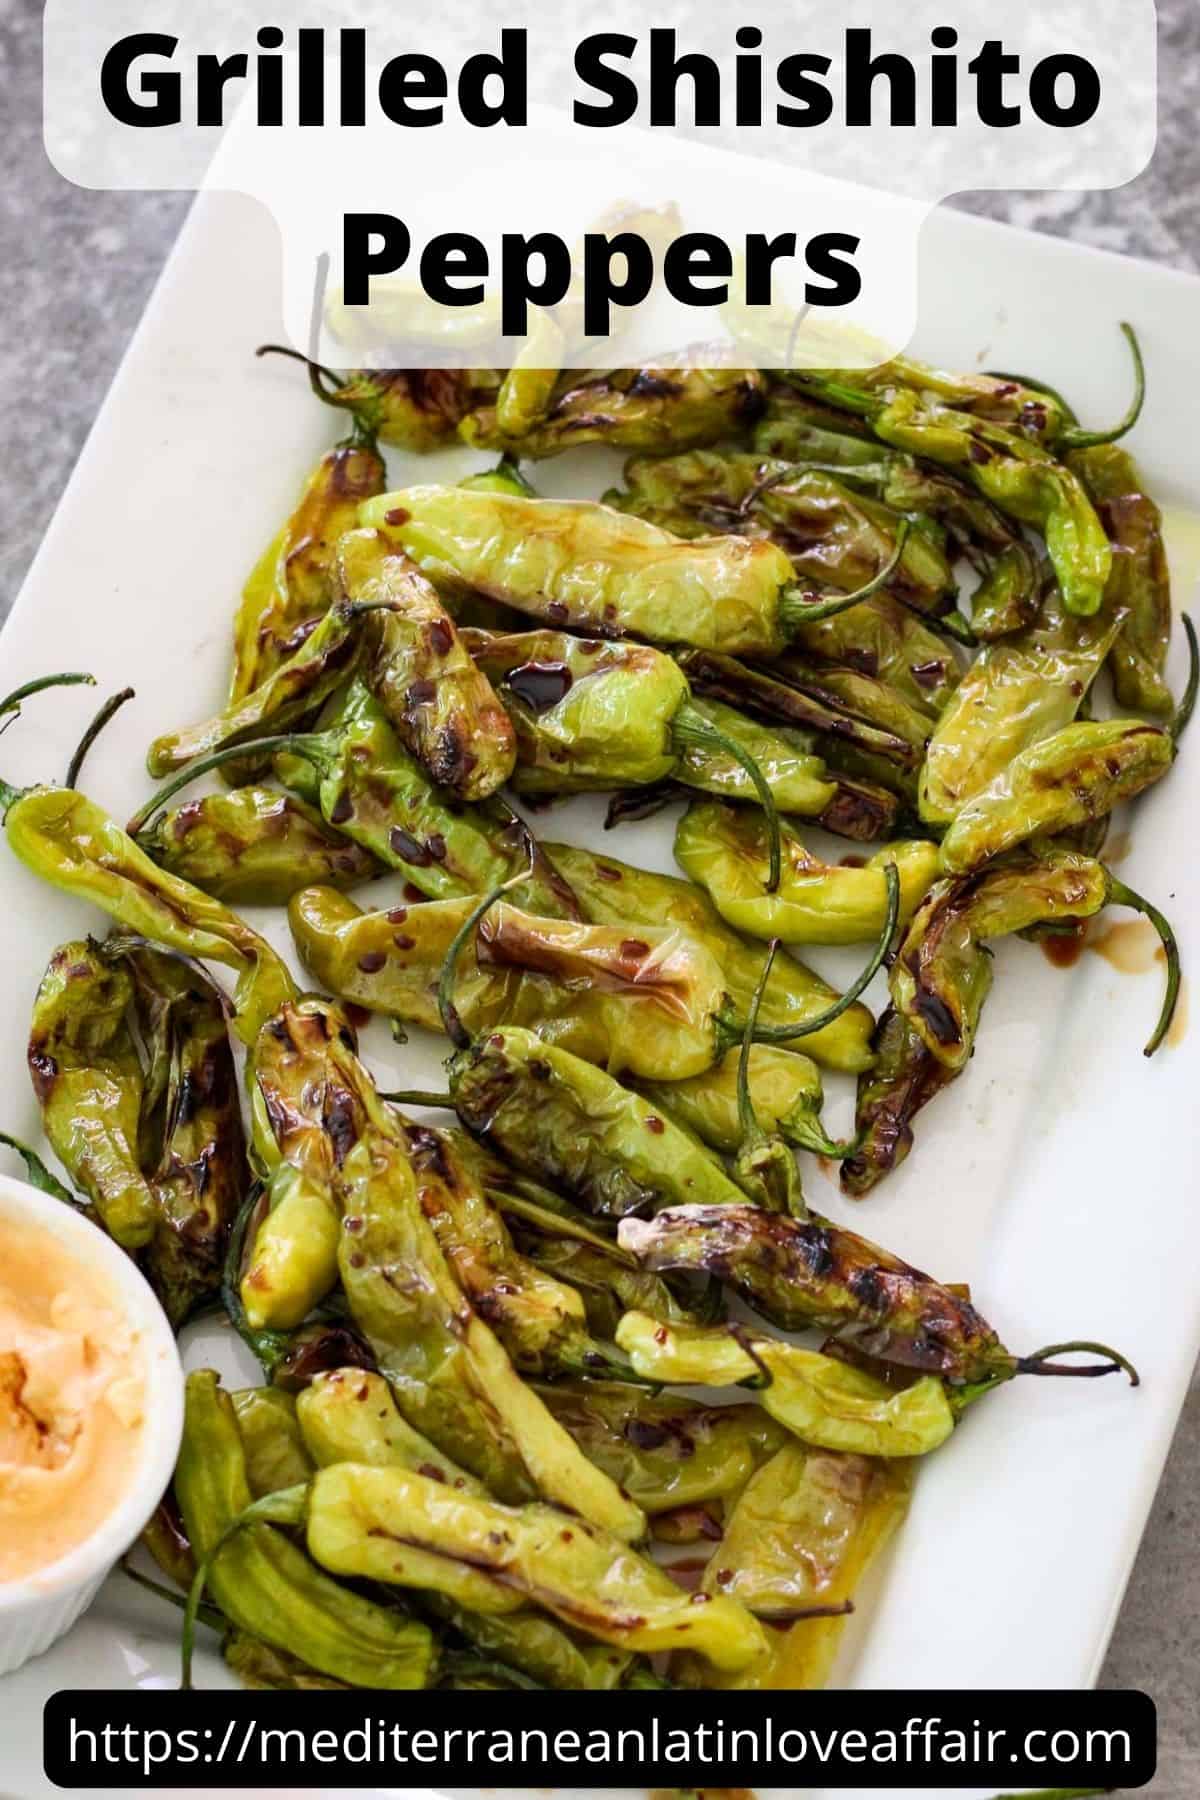 An image prepared for Pinterest. It shows a picture of grilled shishito peppers in a serving tray. There's a dip on the side of the peppers. On top of the picture there's a title bar that says Grilled Shishito Peppers and on the bottom there's a website link. 